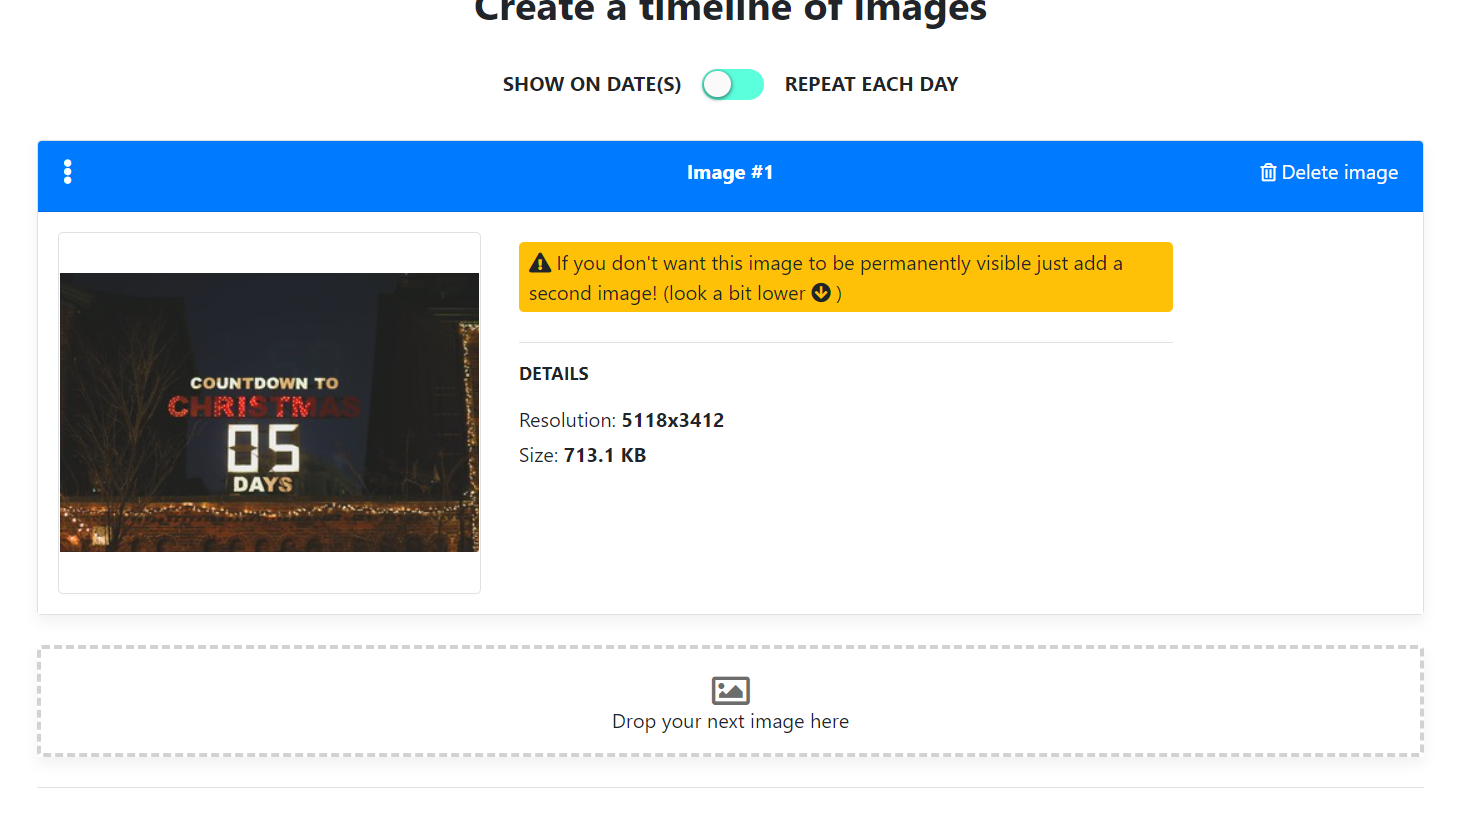 How to add time sensitive dynamic images to an email?